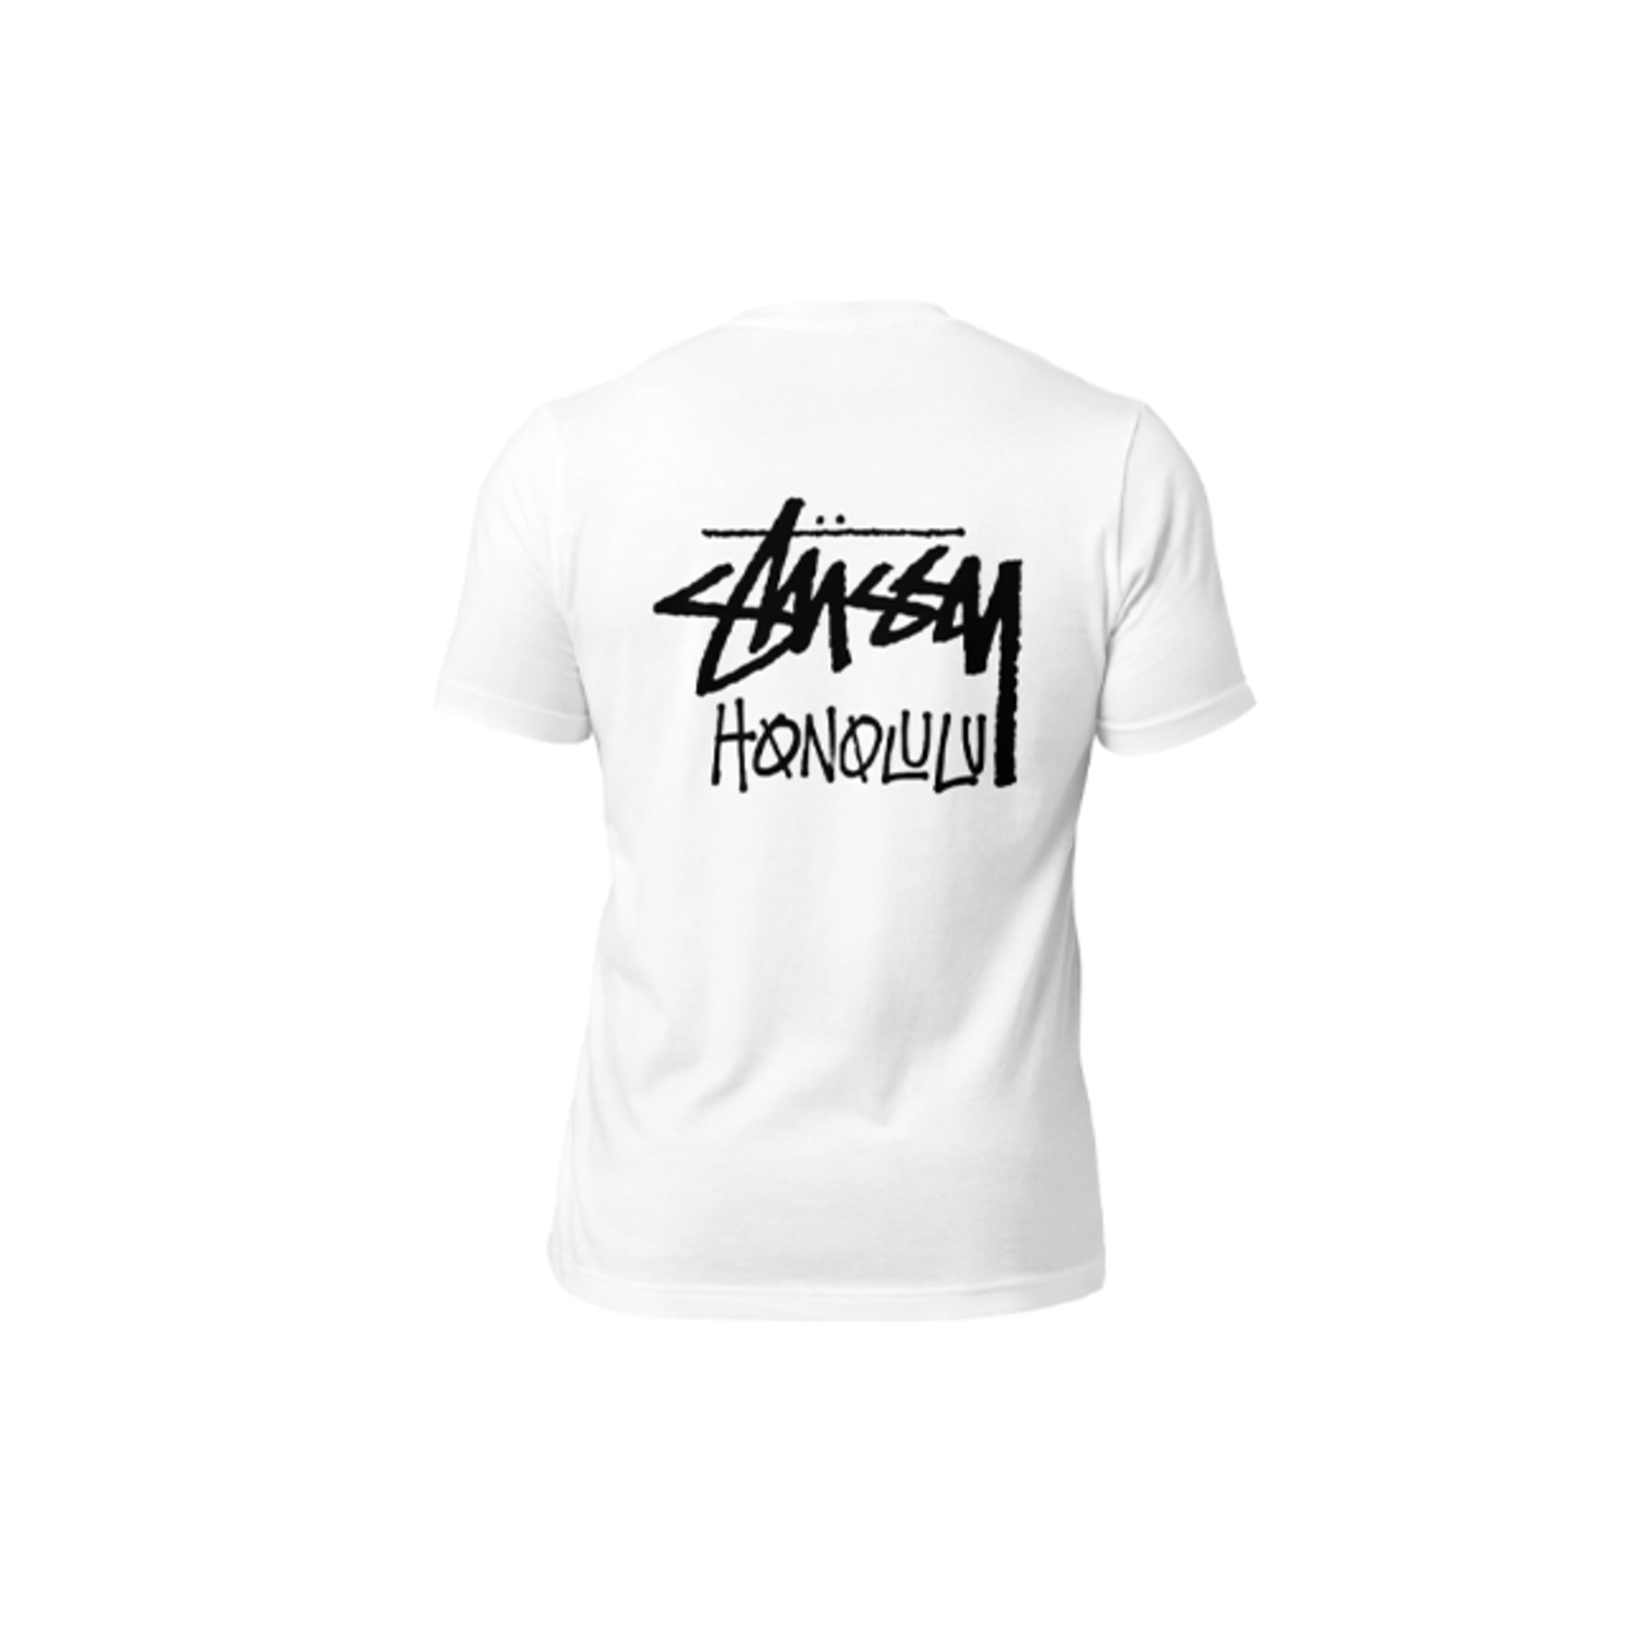 Stussy Stussy Tee Honolulu Exclusive White - The Valley San Francisco